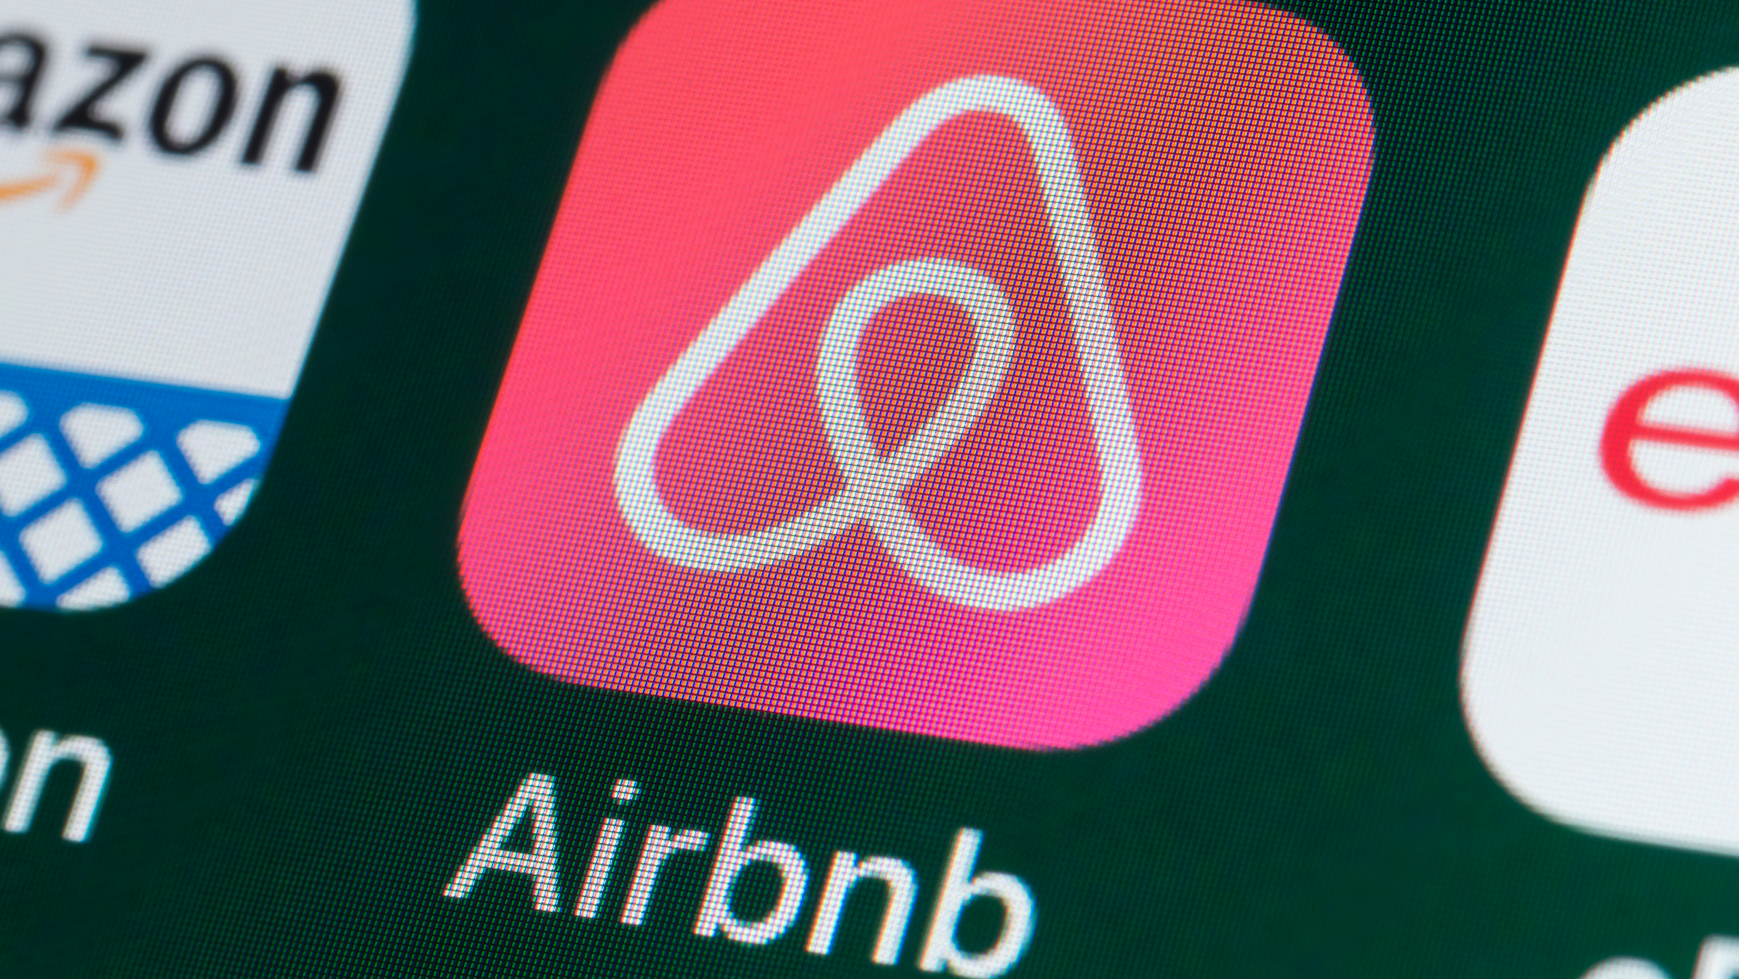 Airbnb CEO predicts permanent change to travel because of coronavirus